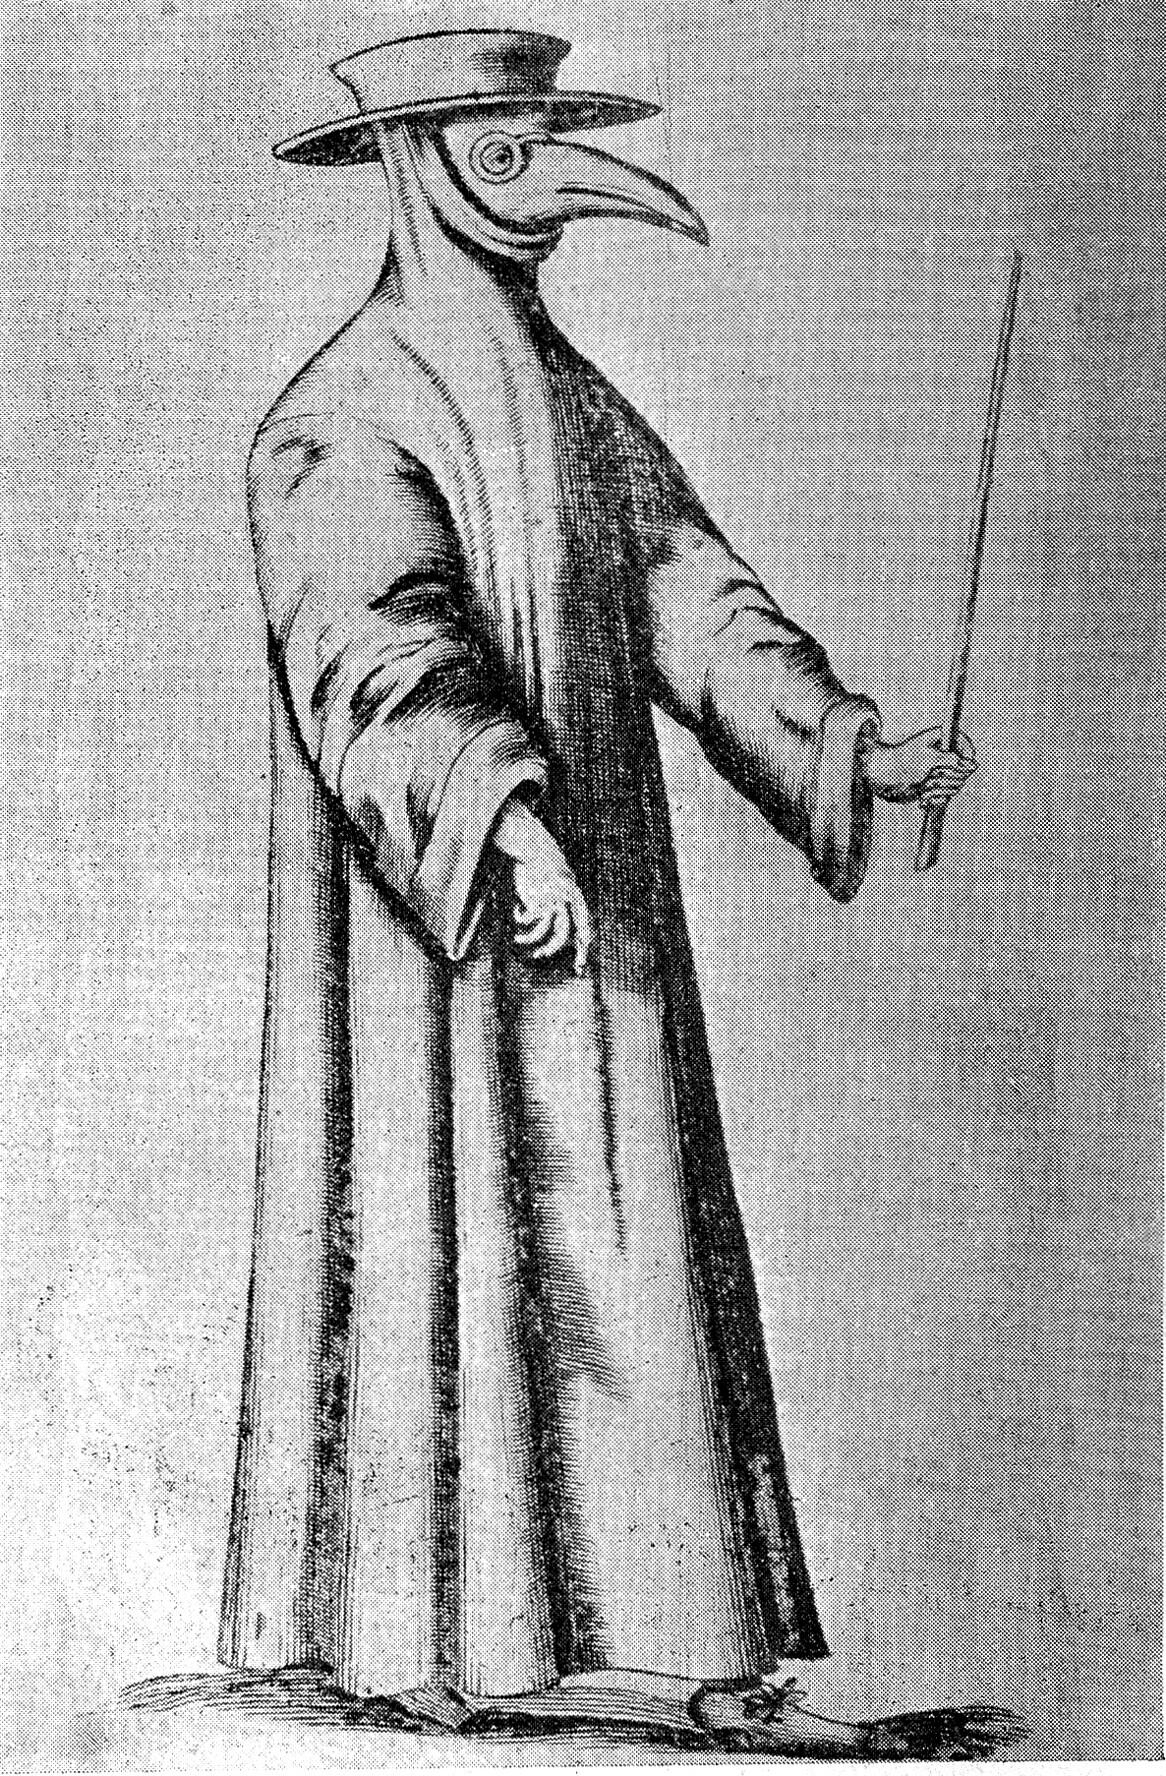 Black and white engraving of the the figure of a human, dressed in a long robe, with a mask in the shape of a long, curved bird's beak.